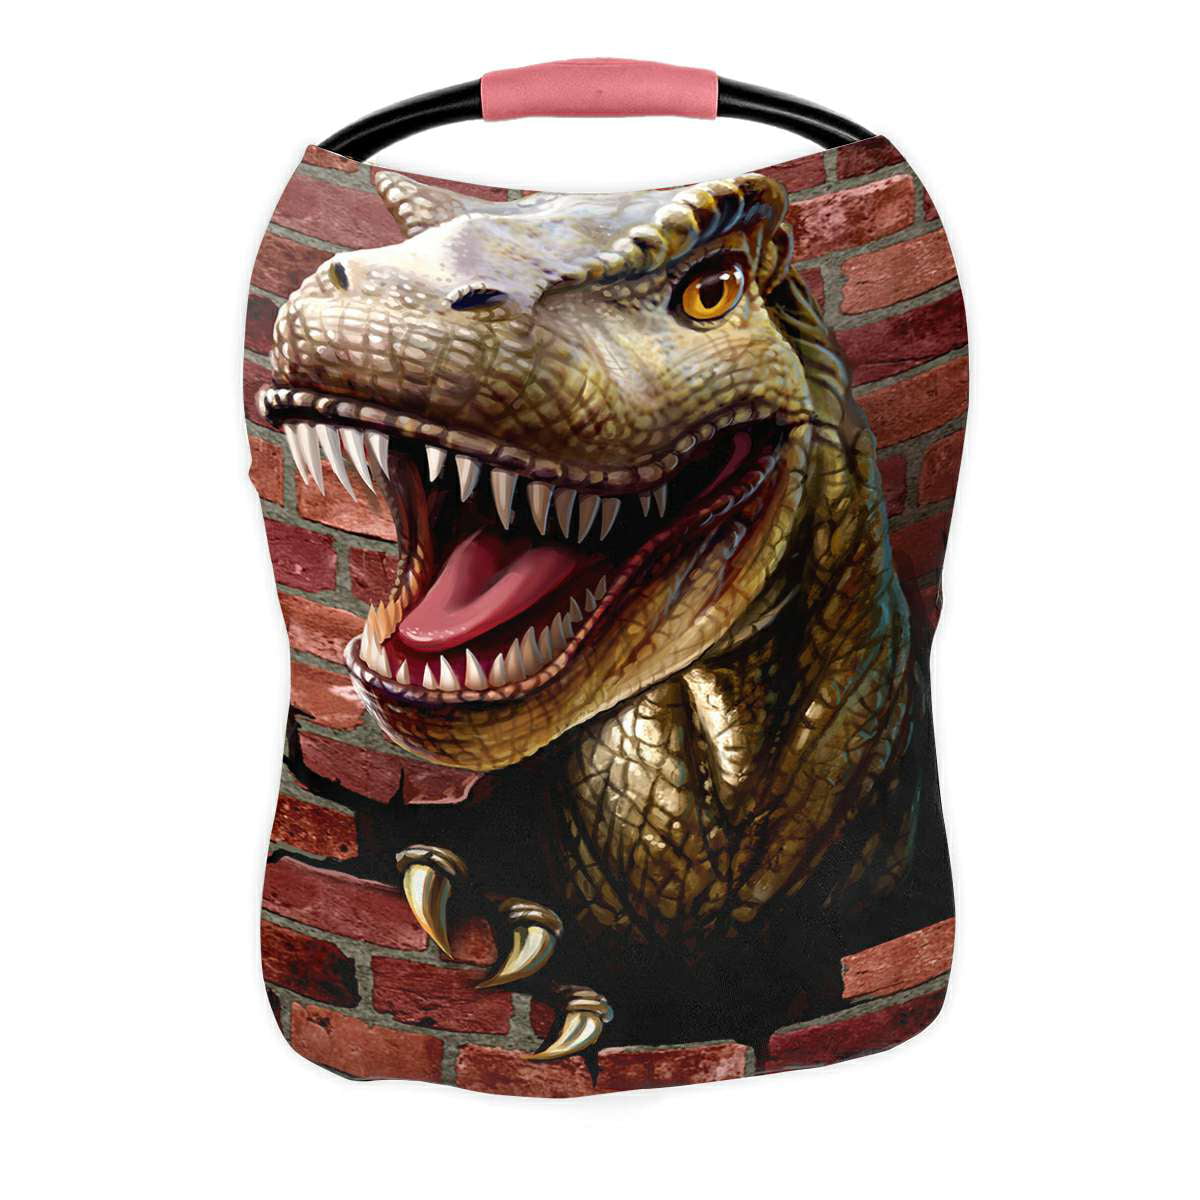 ECZJNT Colorful Dinosaurs Nursing Cover Baby Breastfeeding Infant Feeding Cover Baby Car Seat Cover 